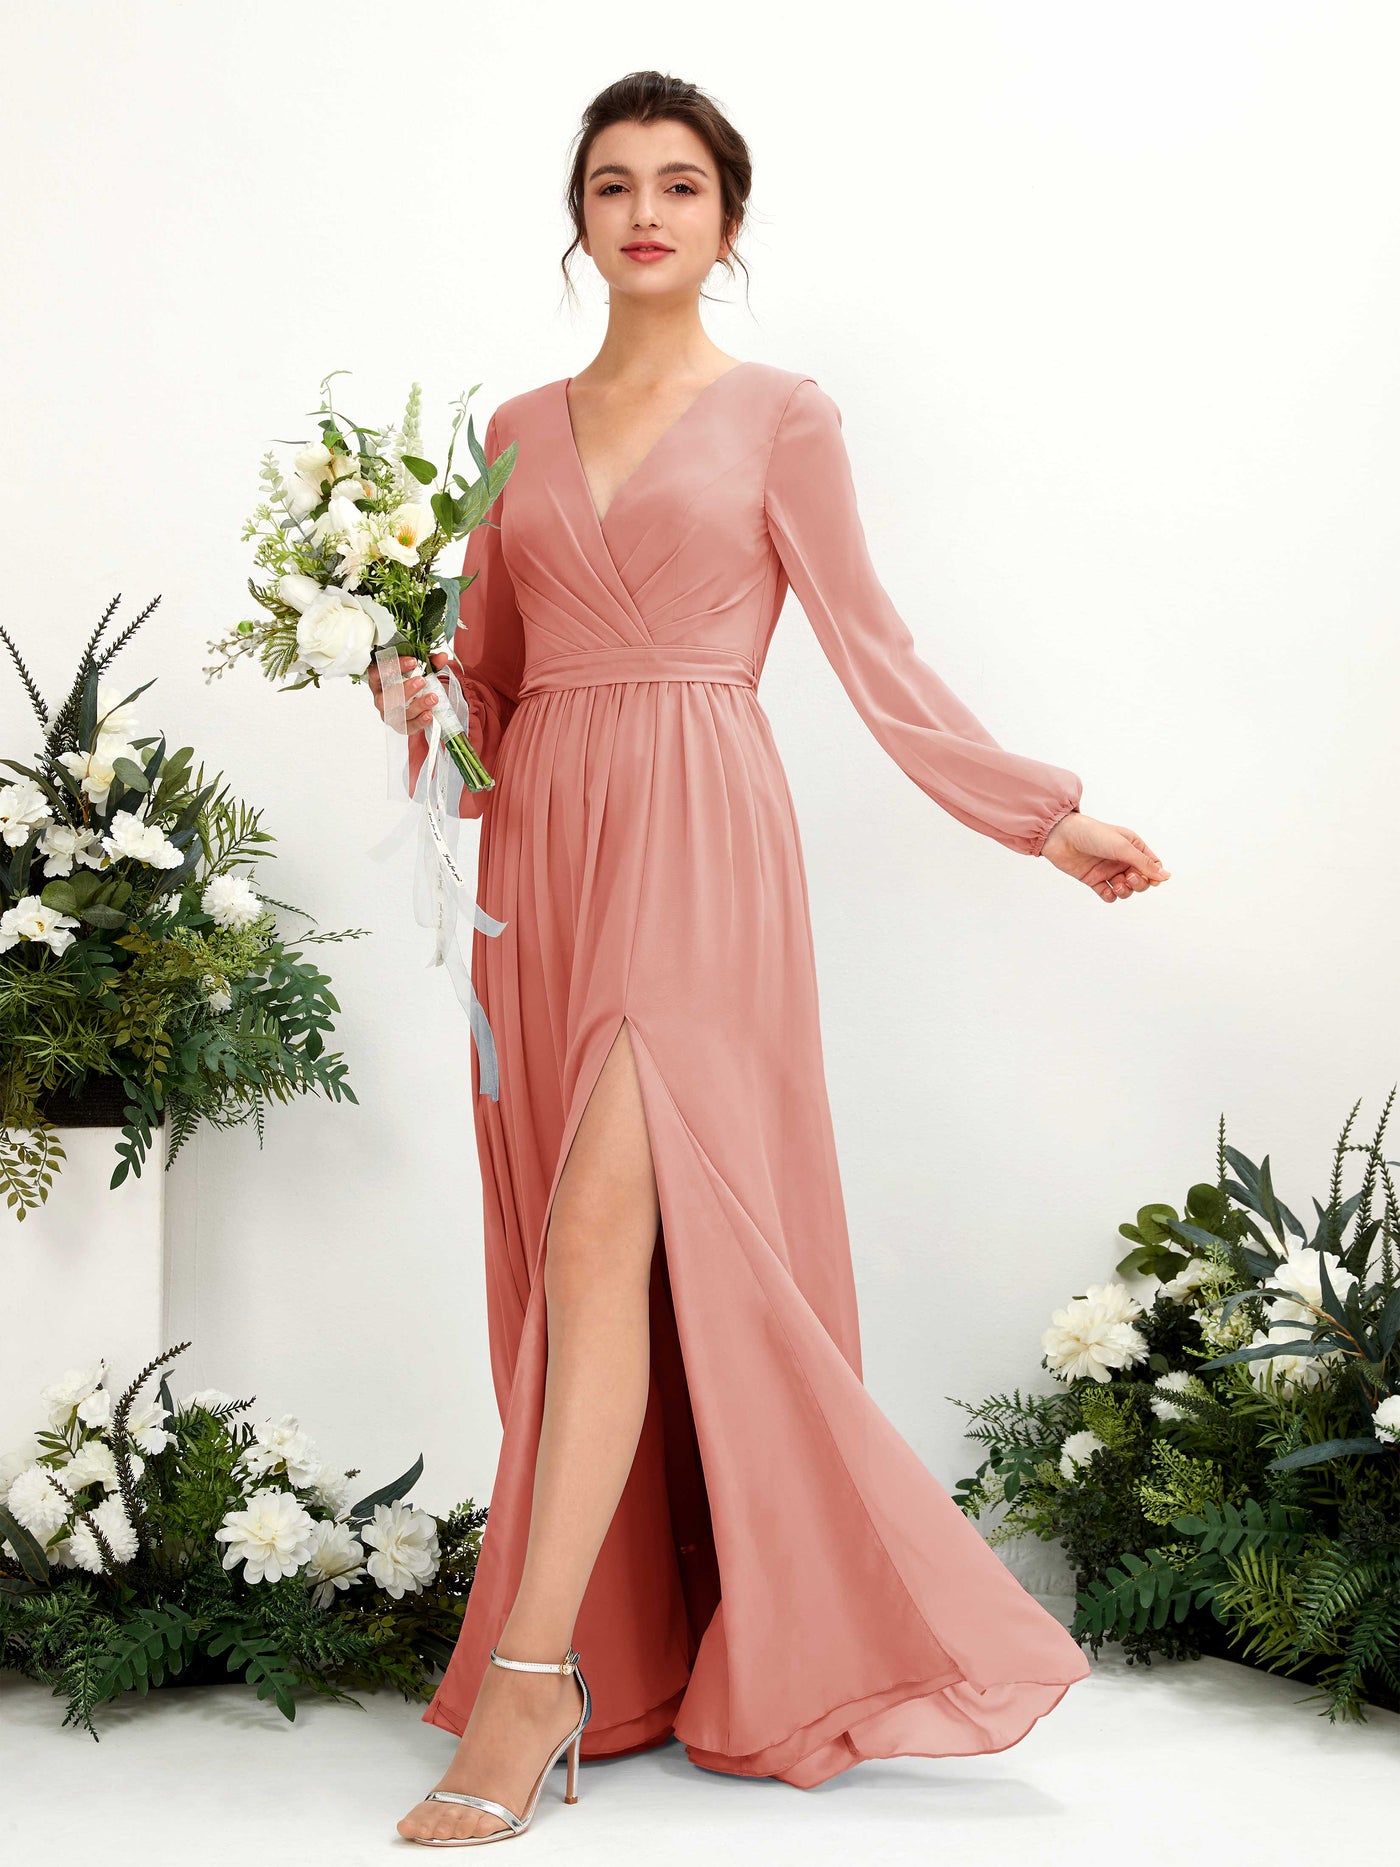 Champagne Rose Bridesmaid Dresses Bridesmaid Dress A-line Chiffon V-neck Full Length Long Sleeves Wedding Party Dress (81223806)#color_champagne-rose